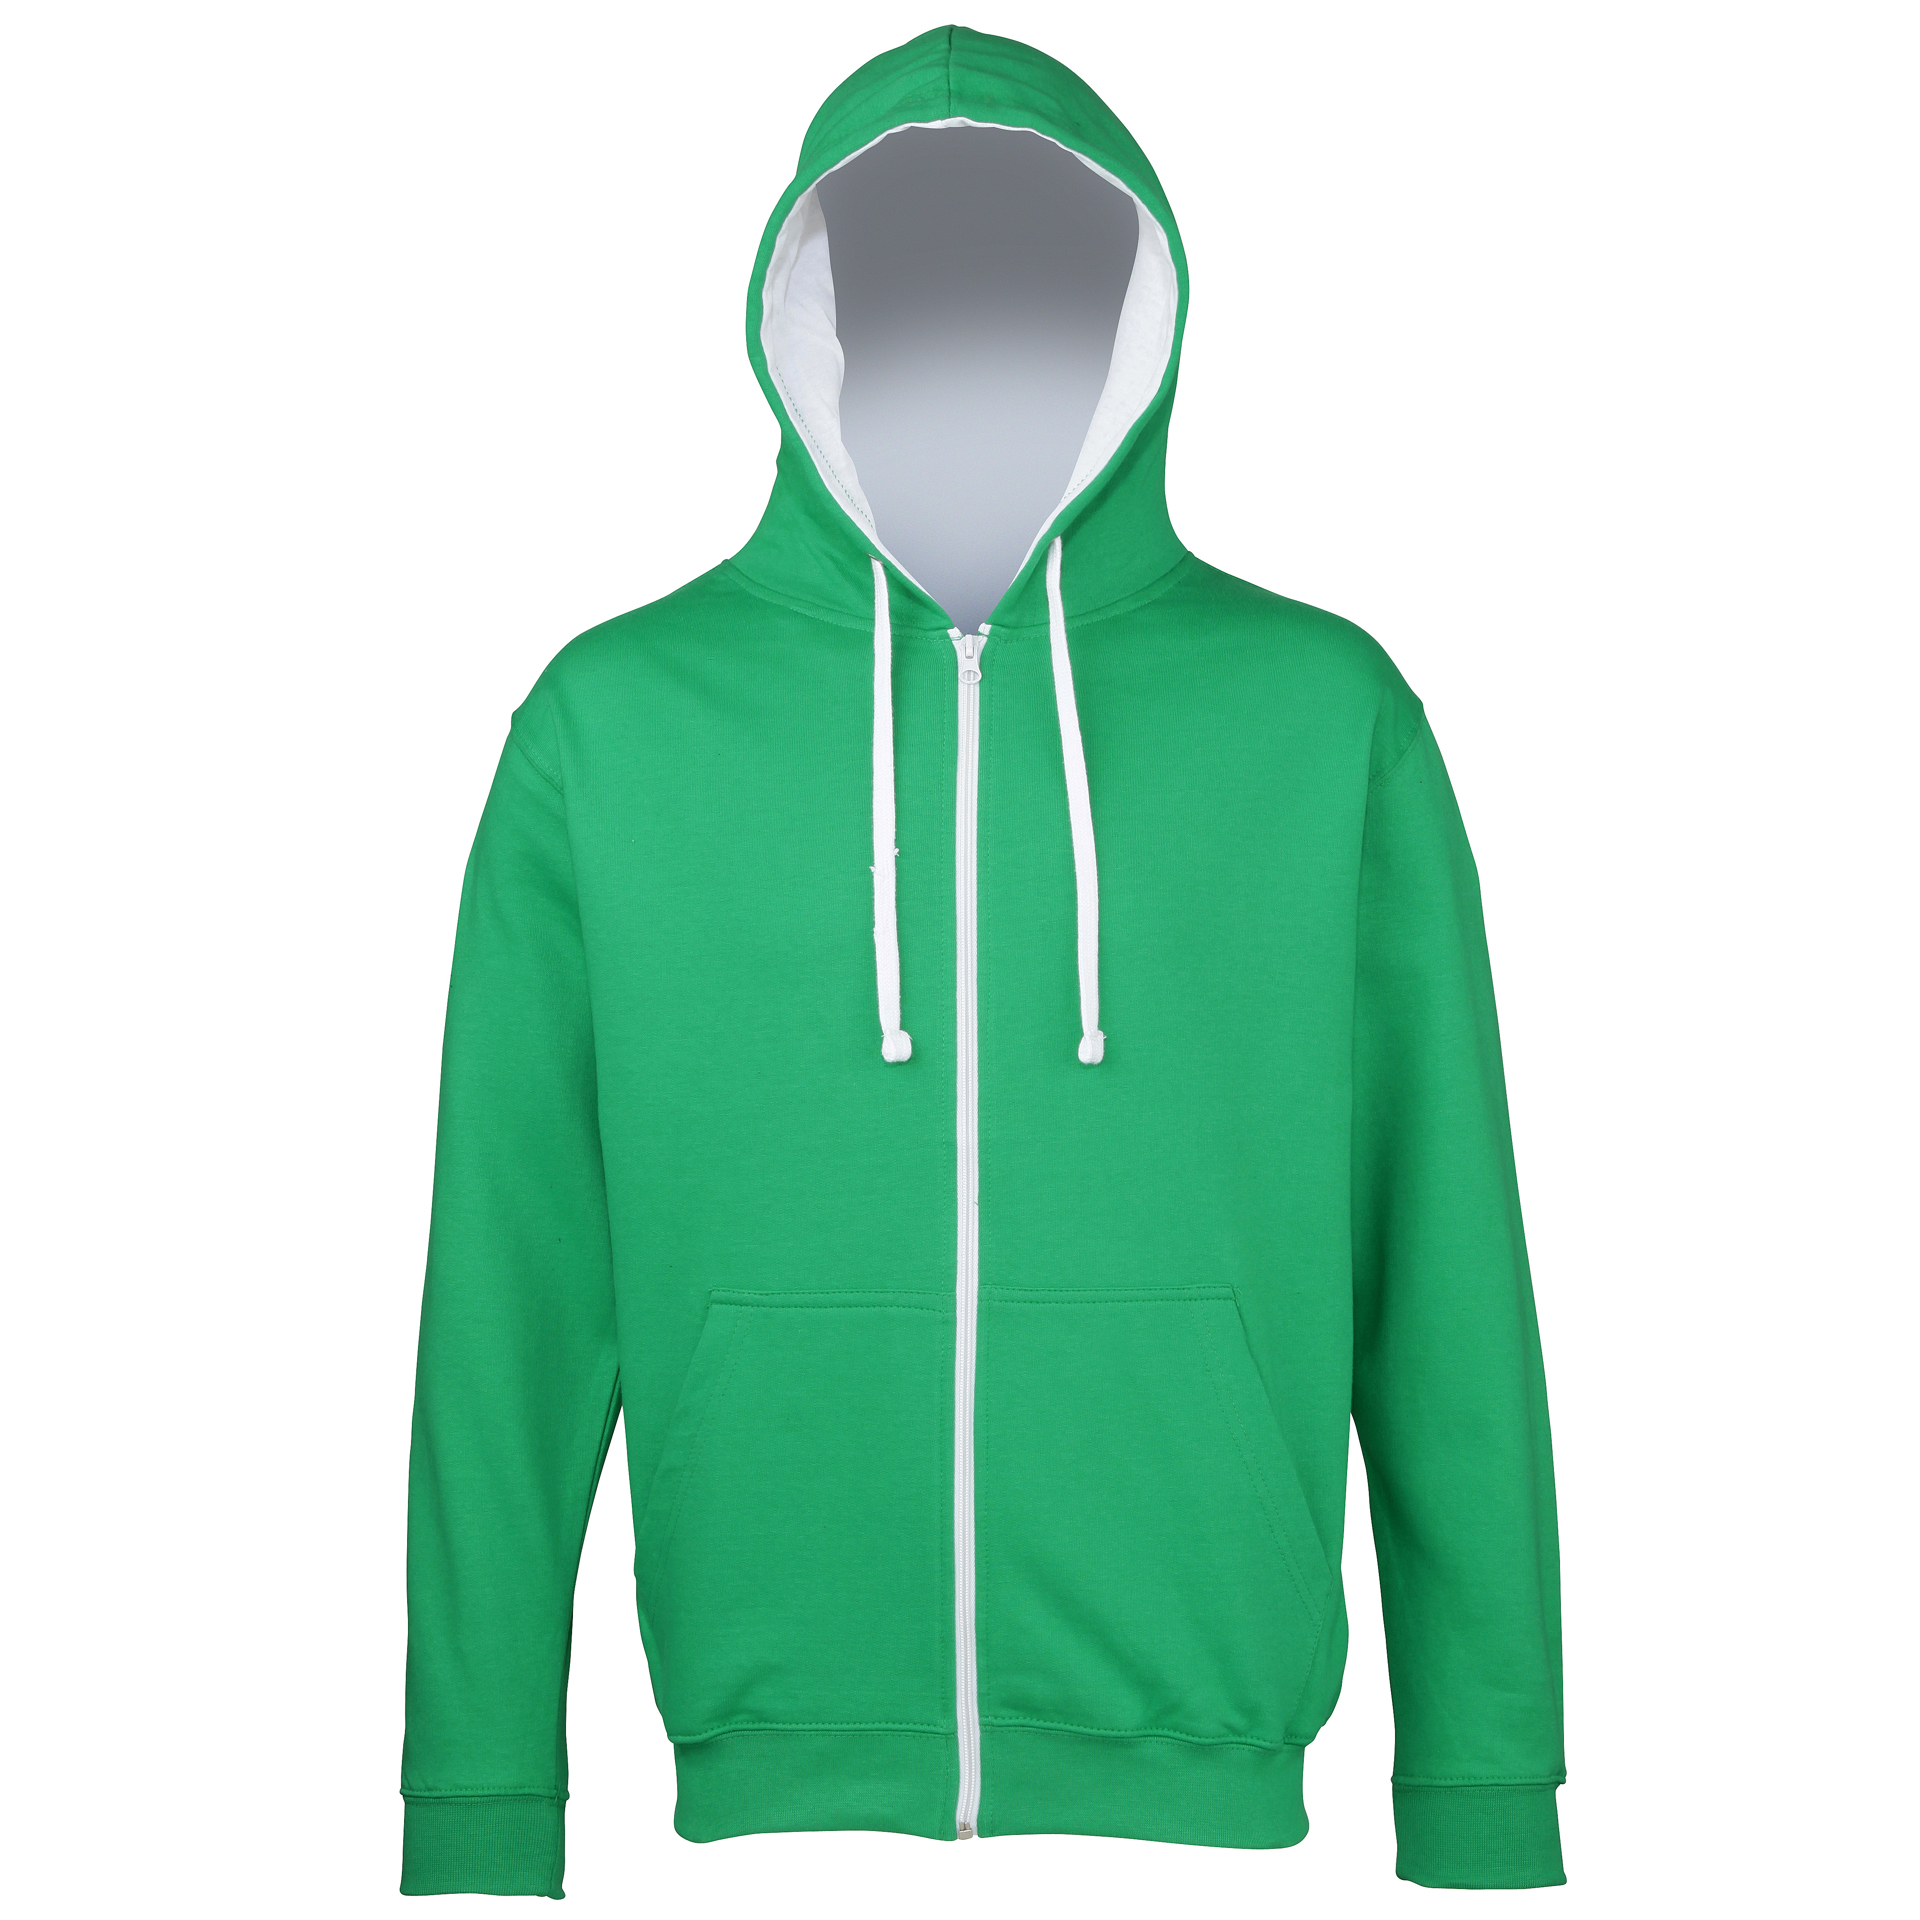 Men's Varsity Hoodie in green with white details and lining